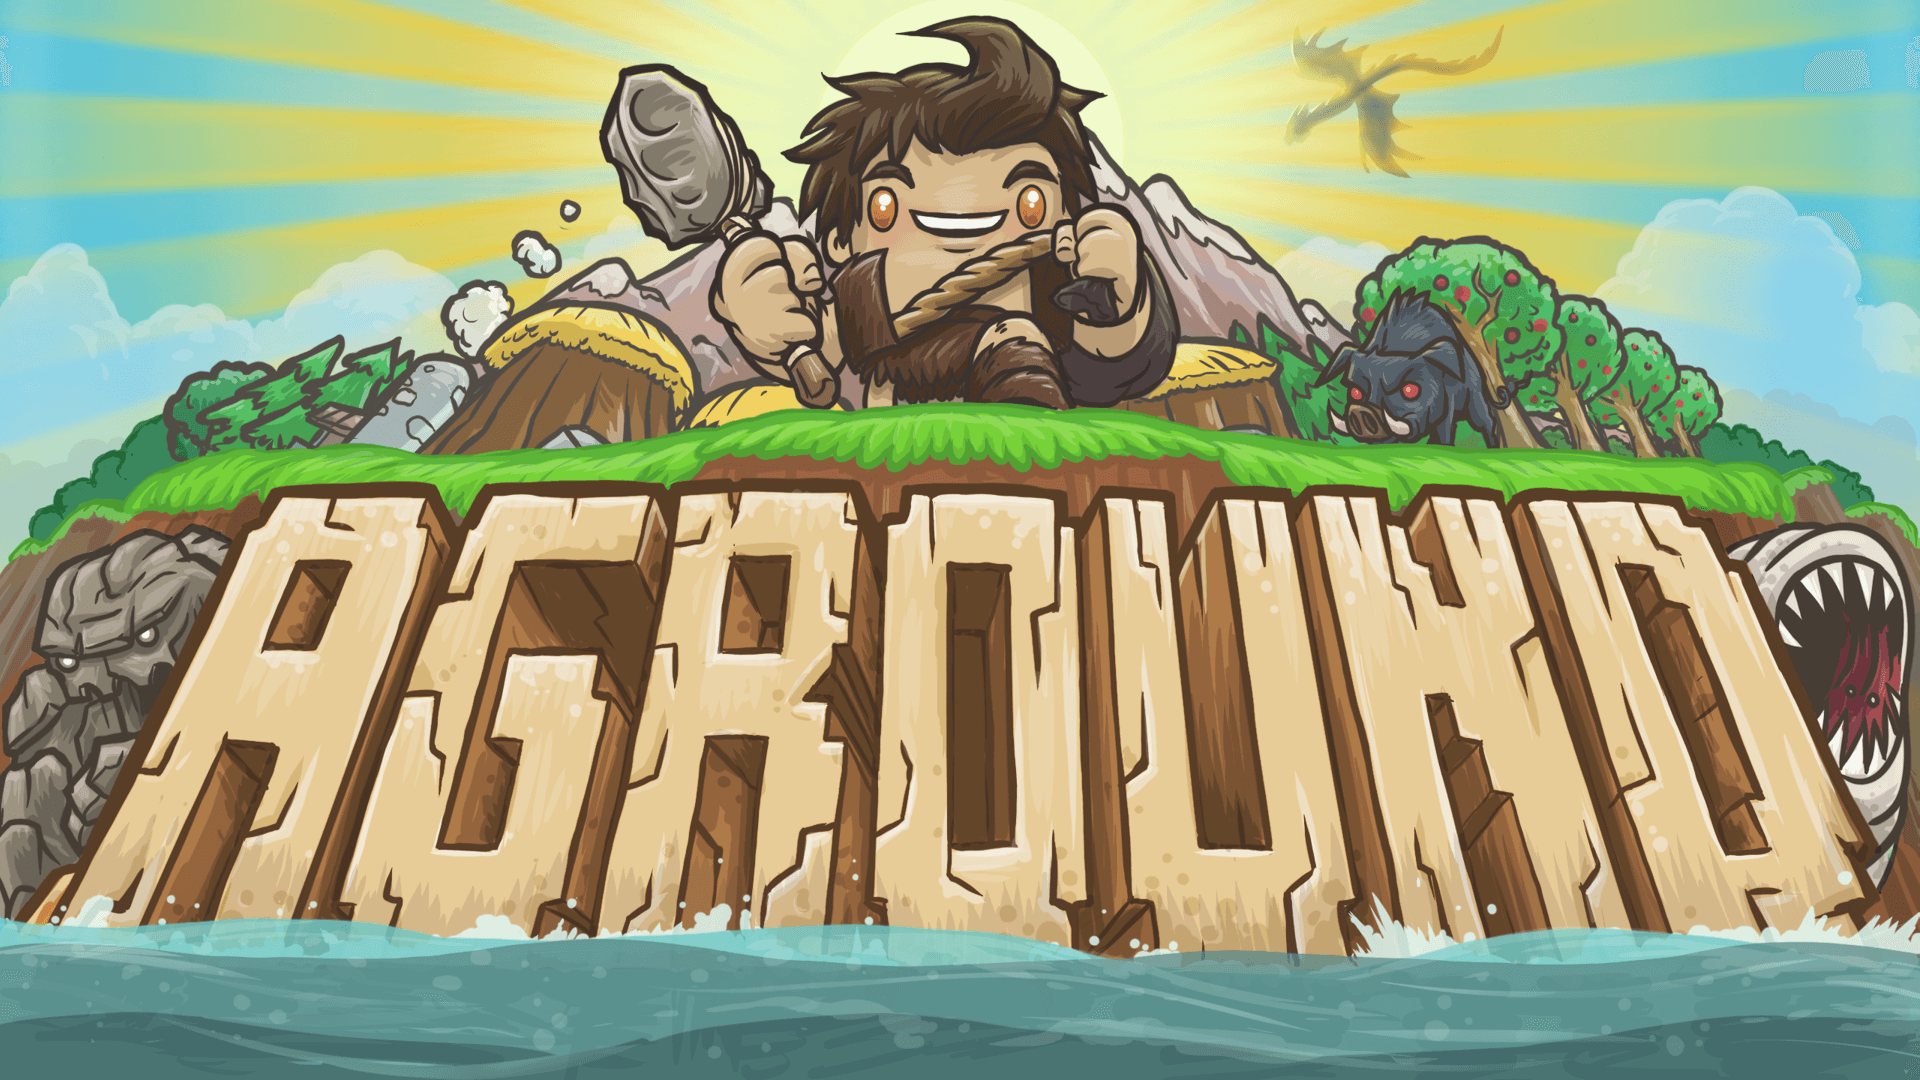 Aground Review: Starting from the Bottom